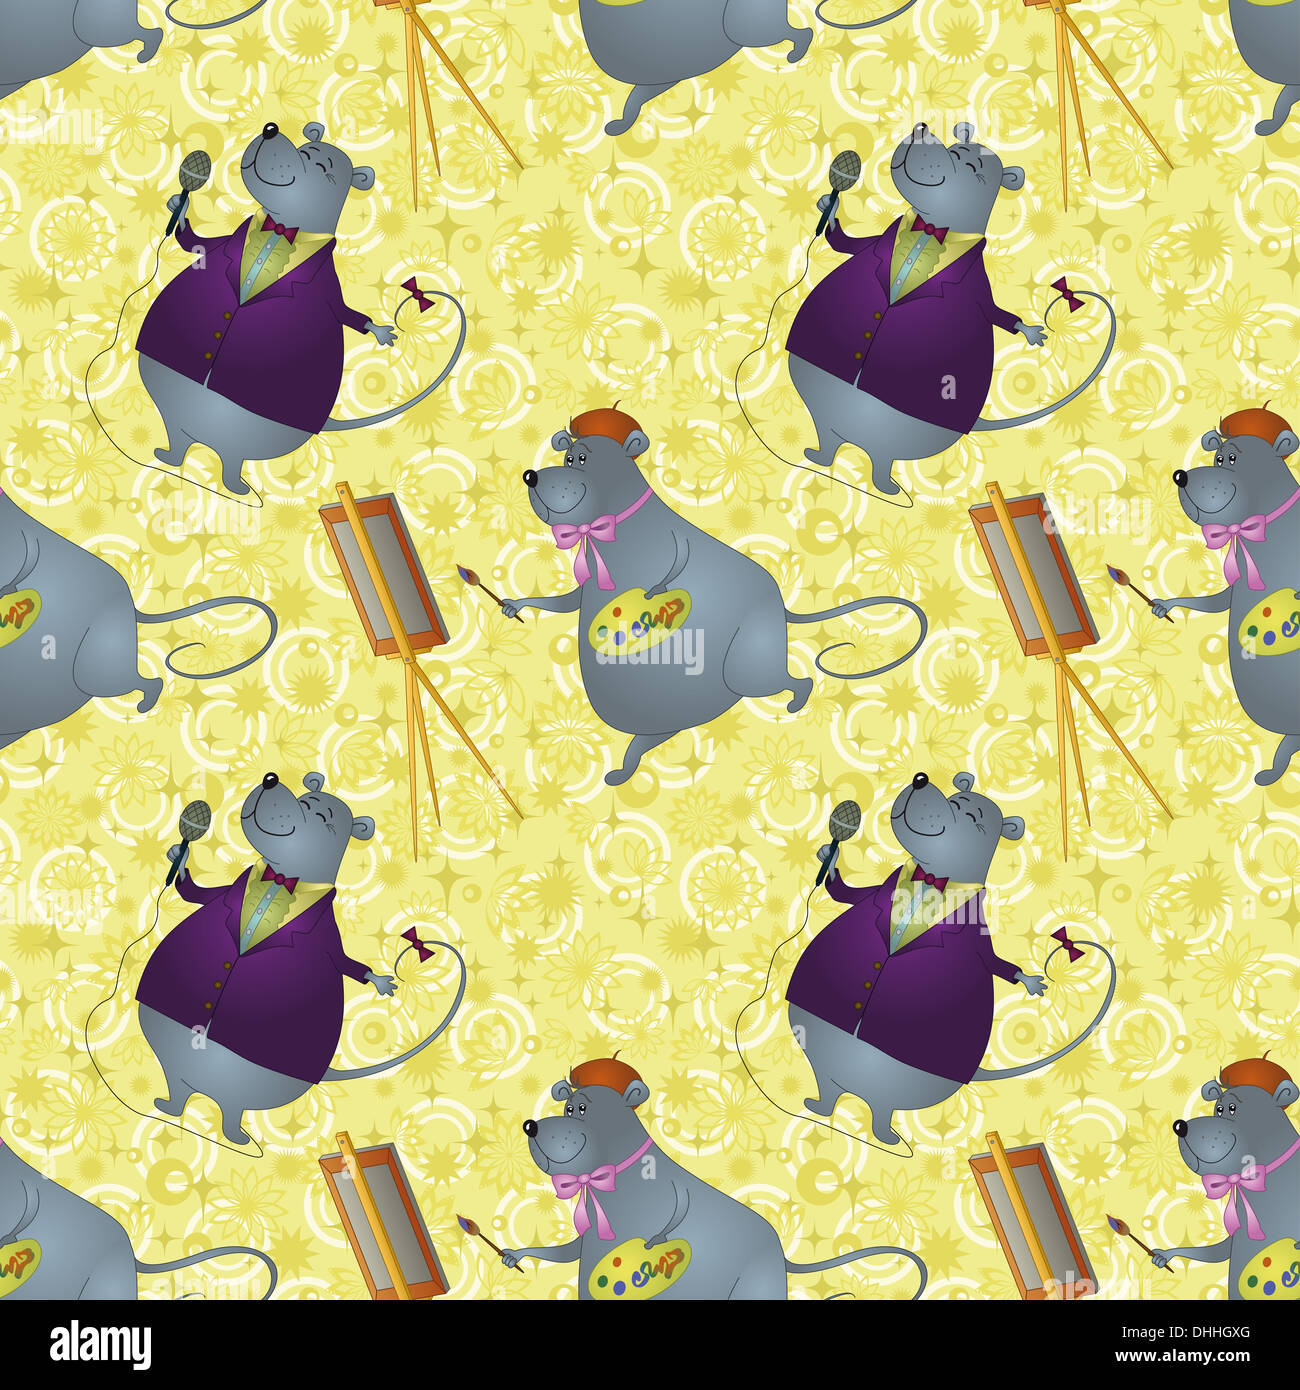 Seamless background, rats artist and singer Stock Photo